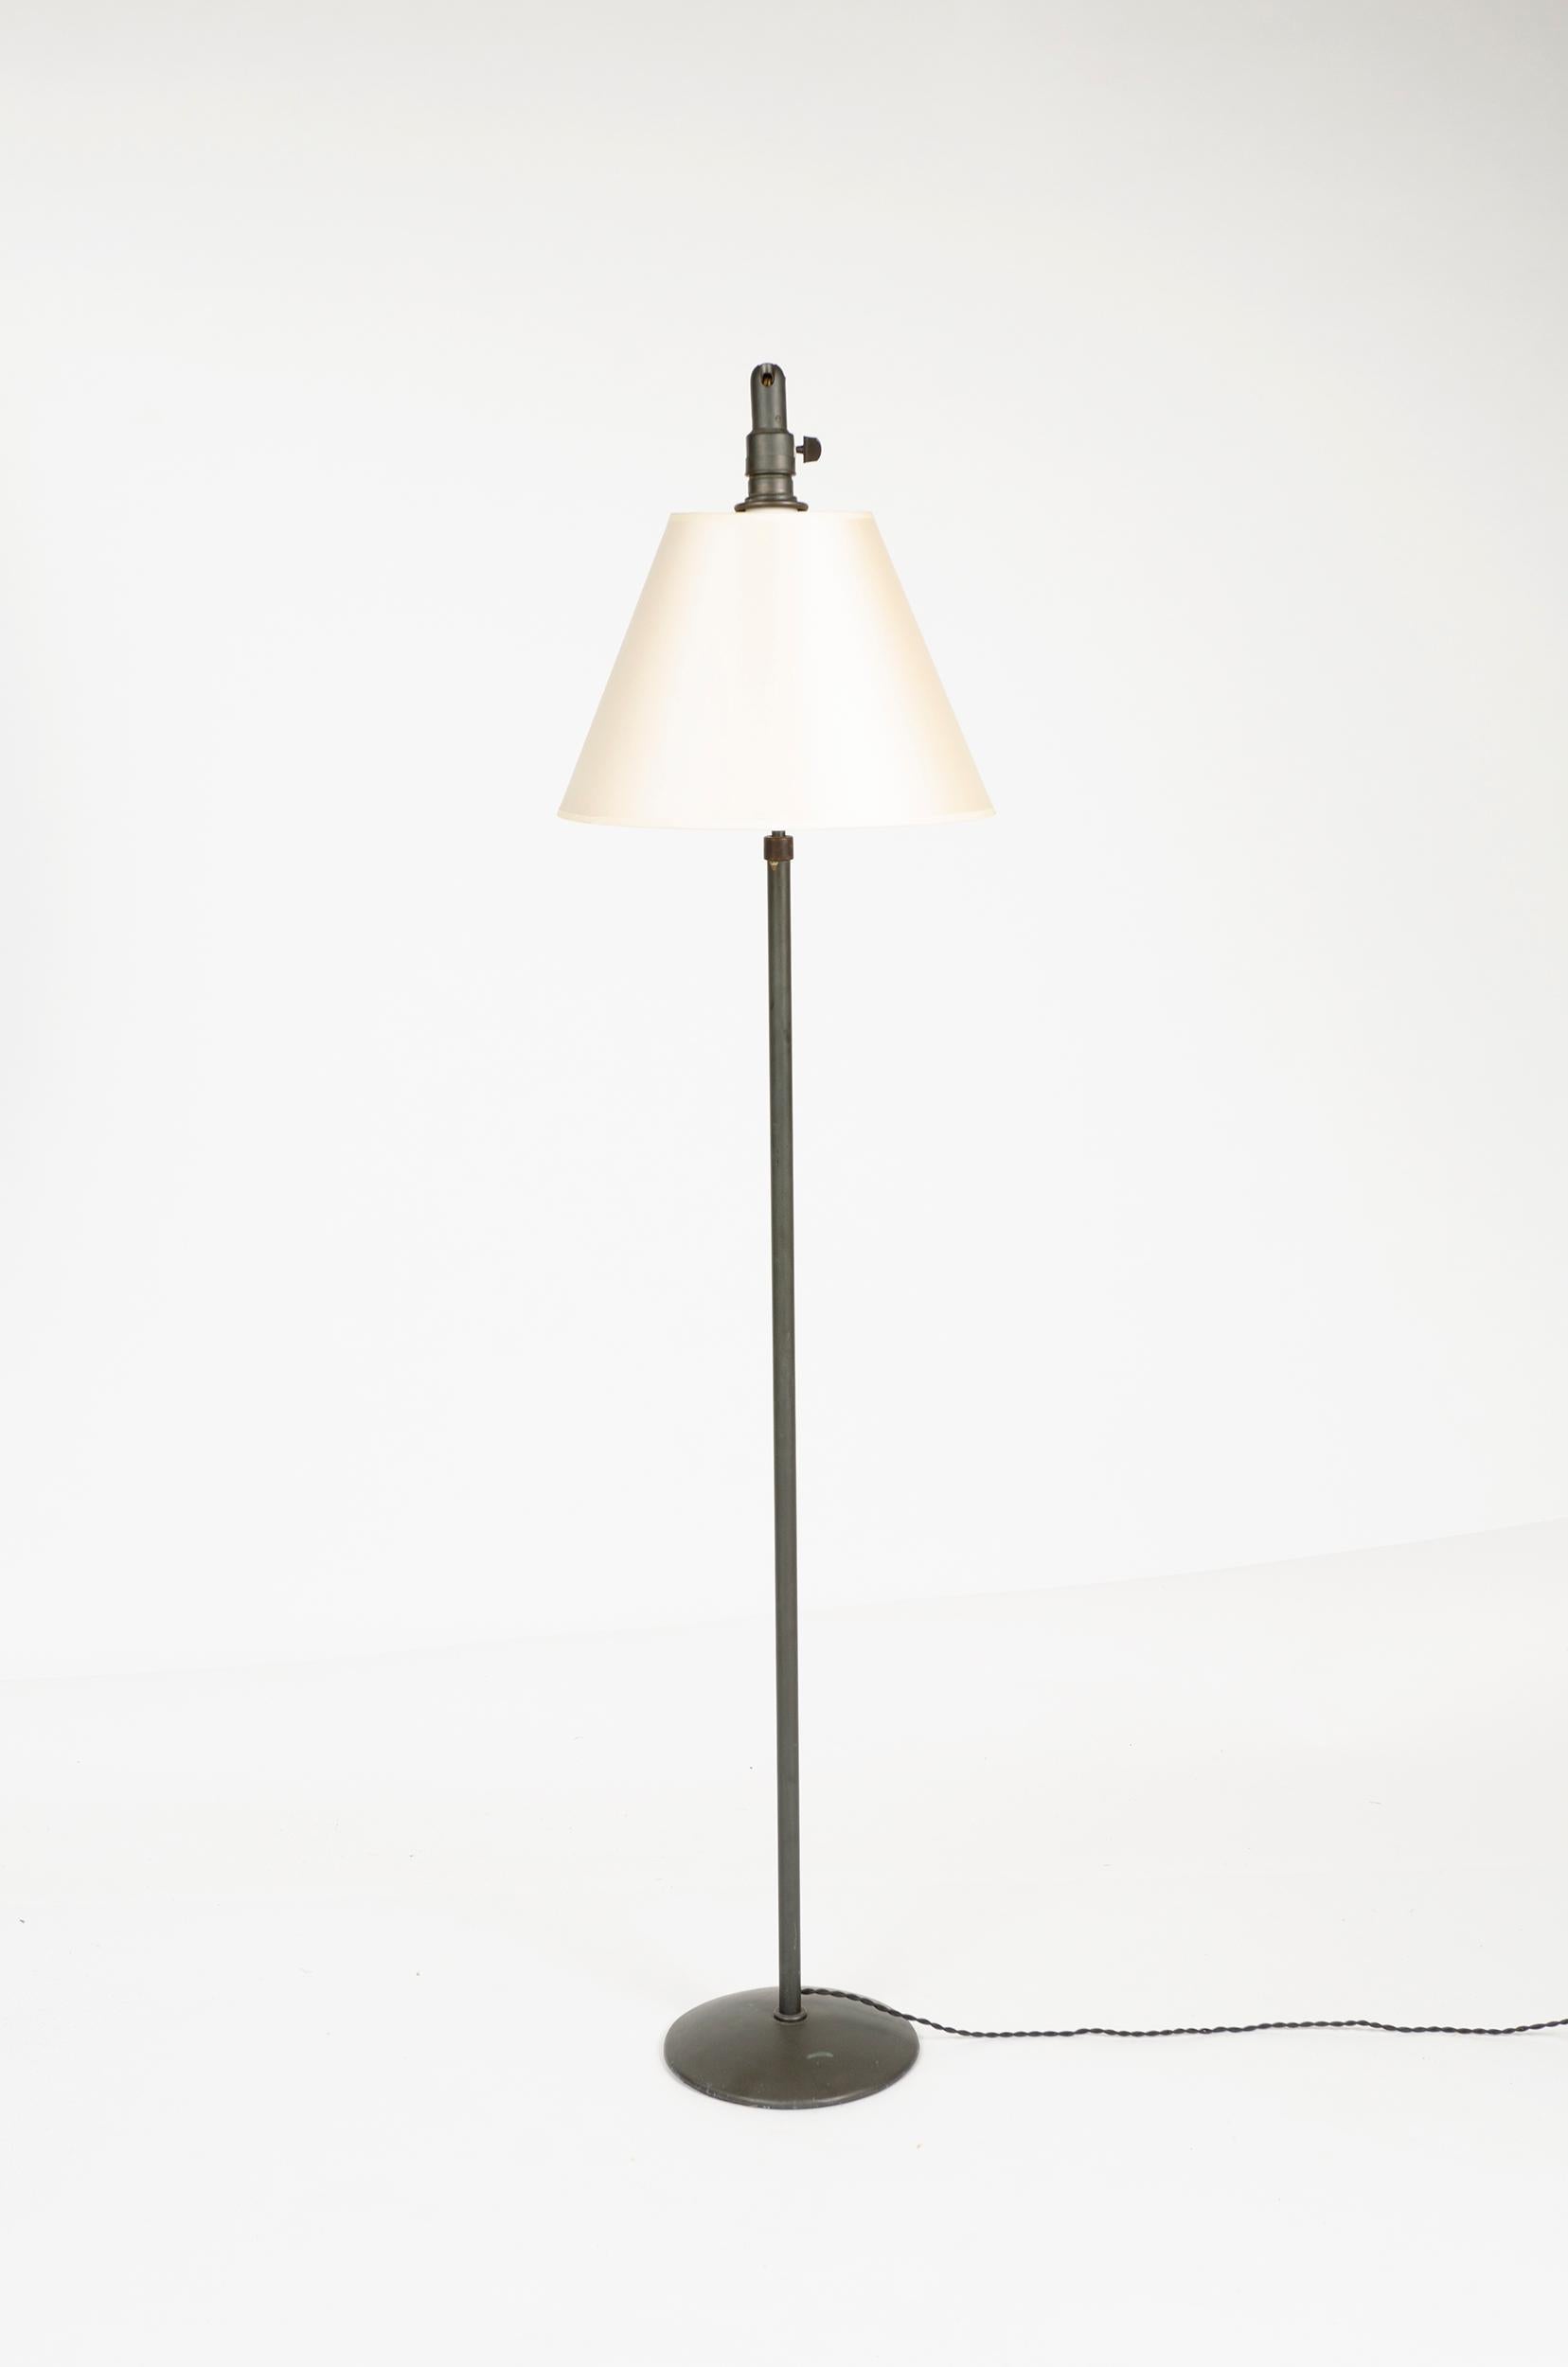 A vertically telescoping brass floor lamp with shade on a pivoting neck.